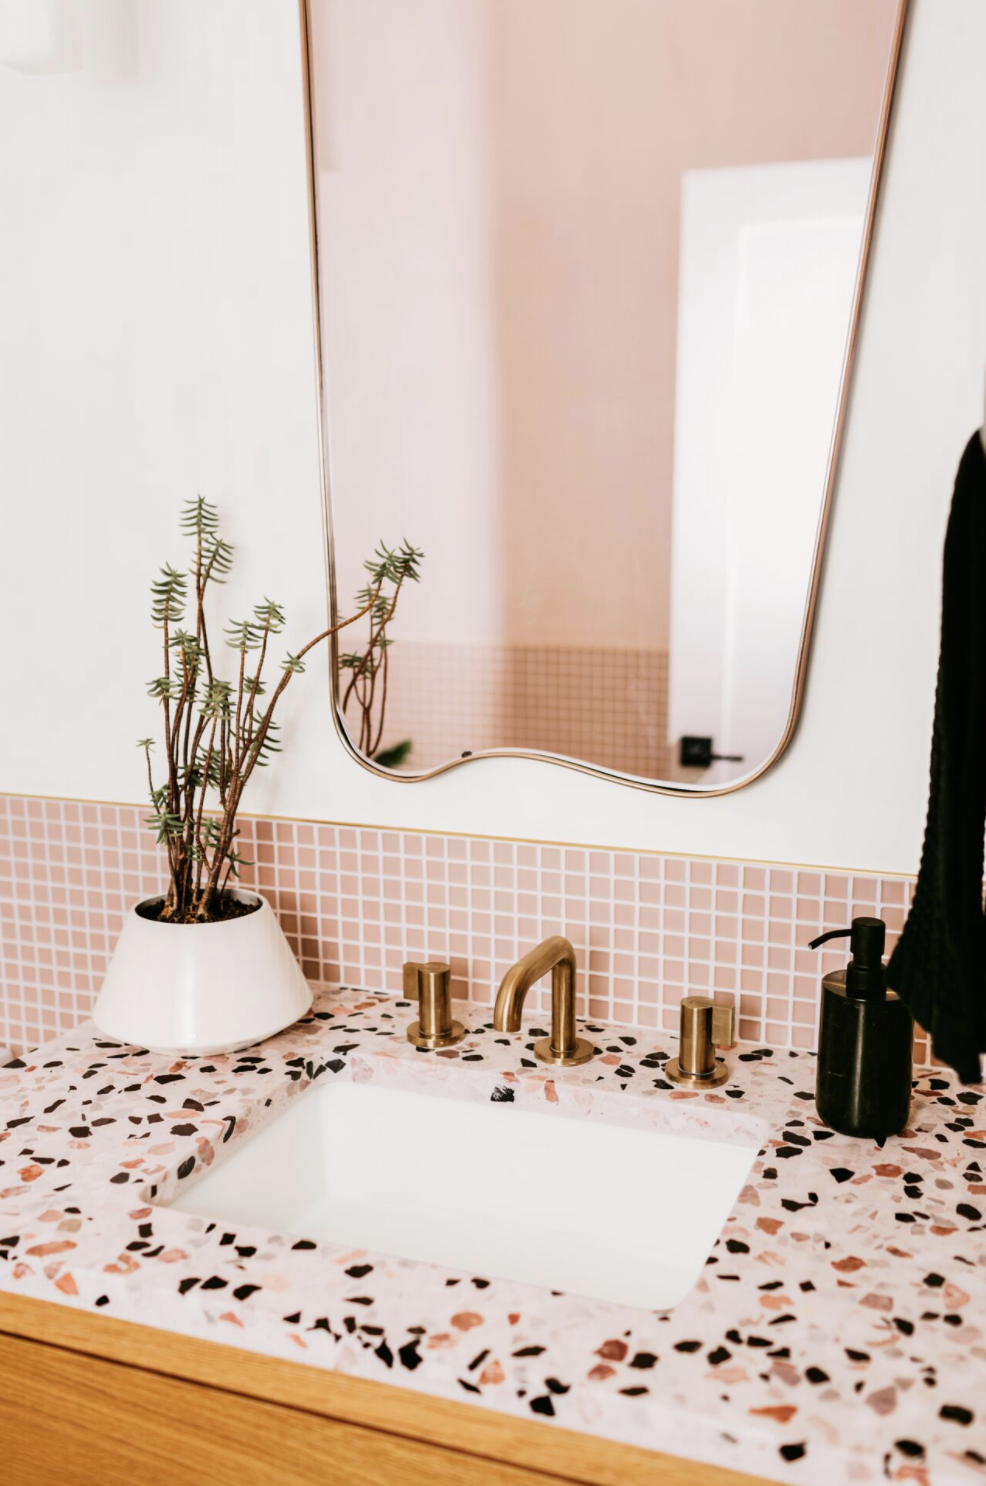 28 Guest Bathroom Ideas to Make Guests Feel Welcome